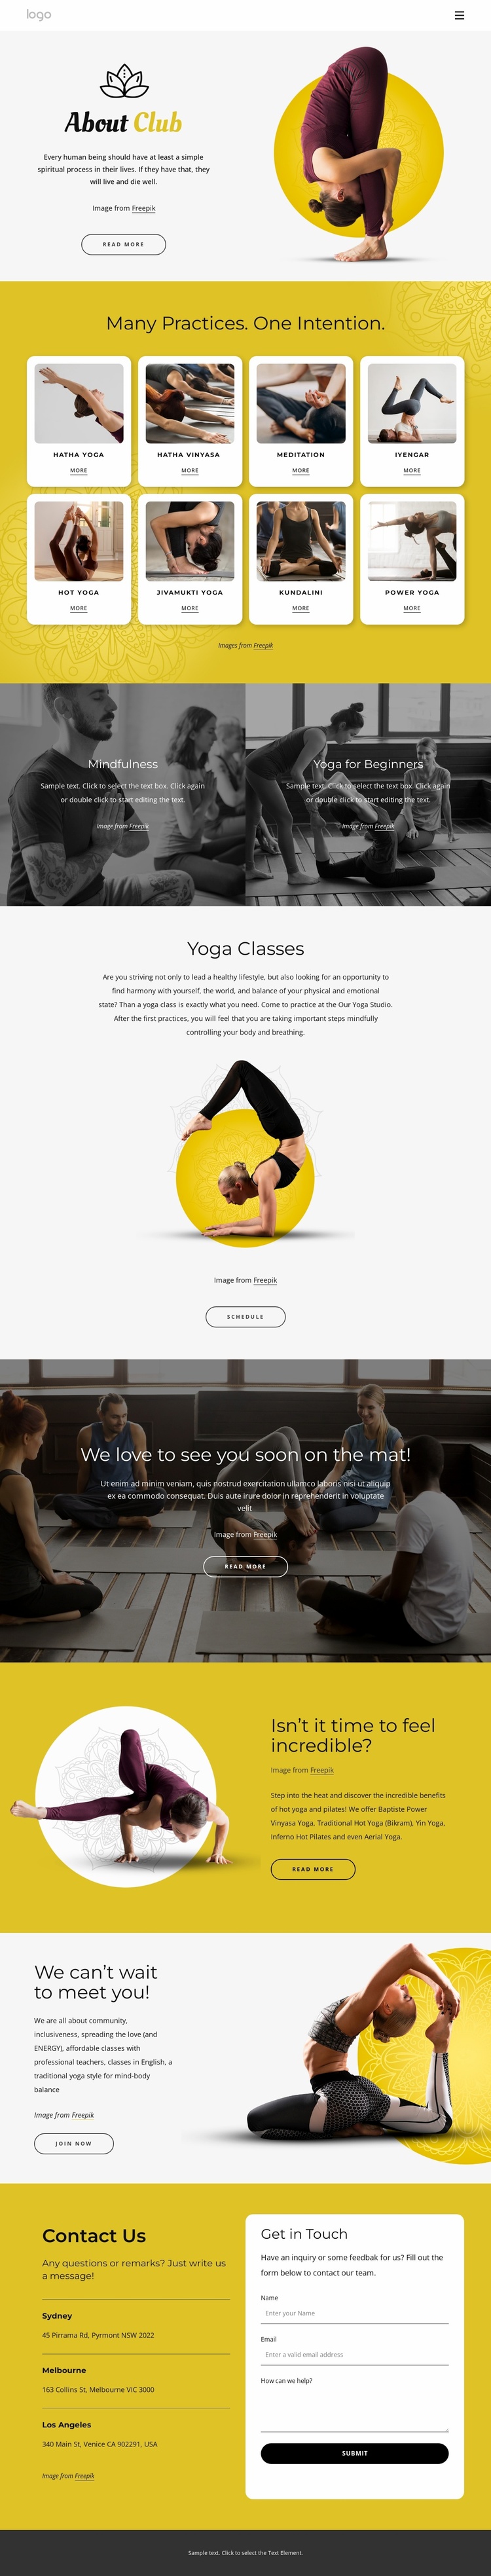 Physical, ethical and spiritual practice Landing Page